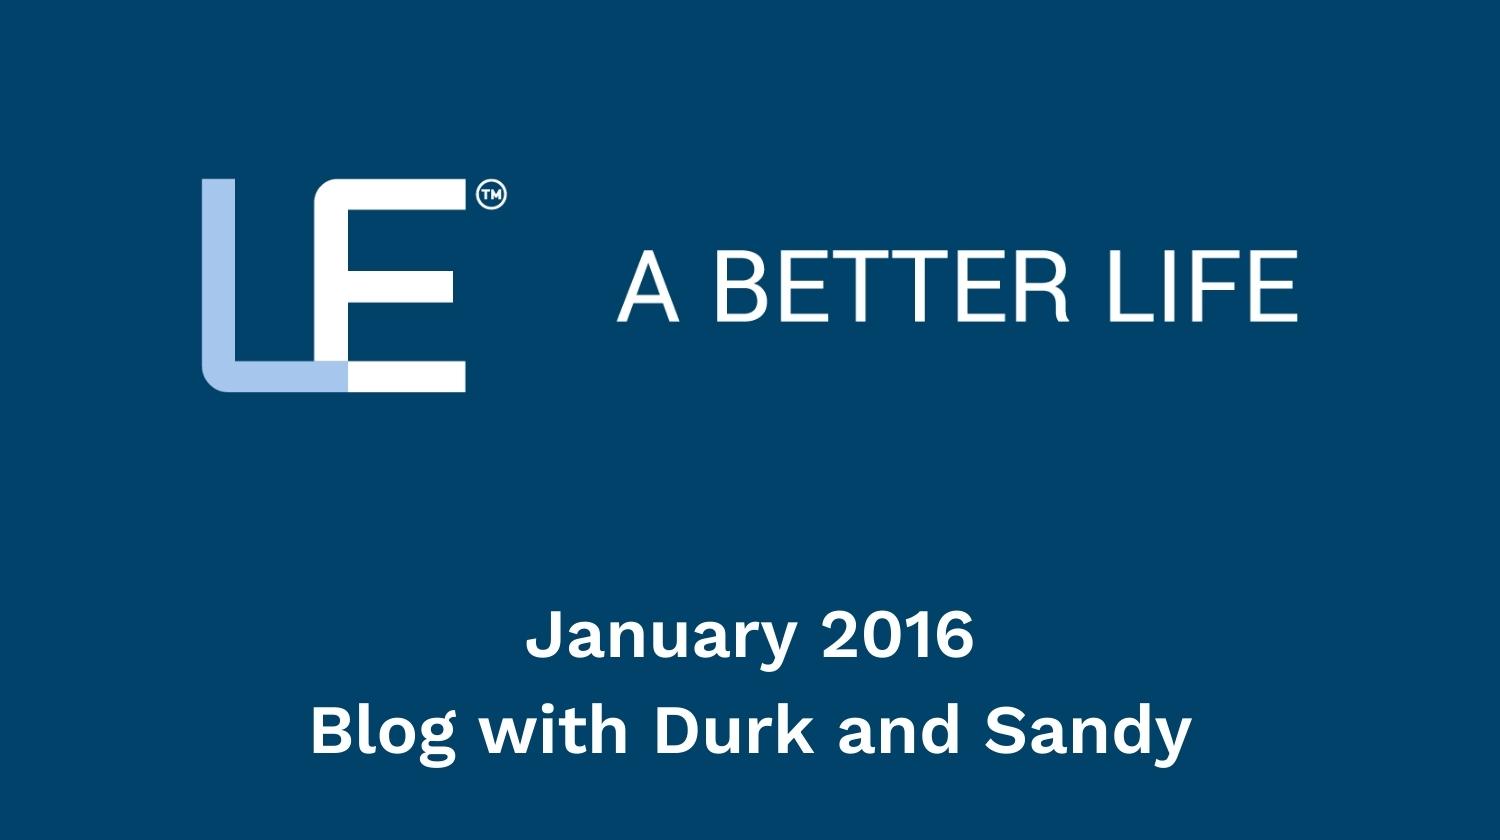 January 2016 Blog with Durk and Sandy